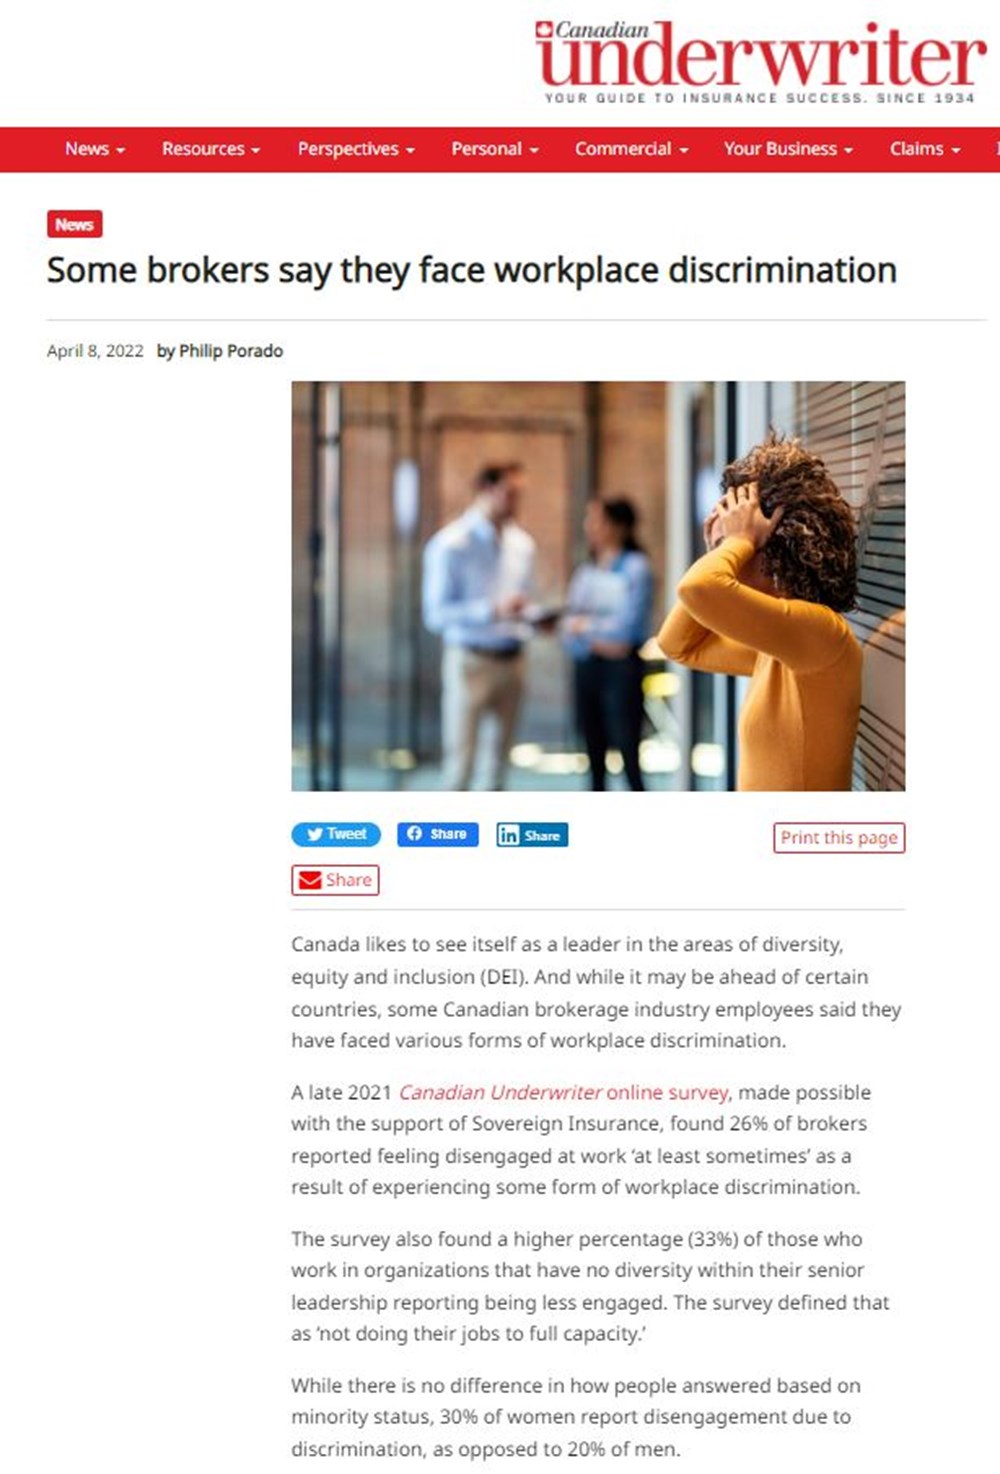 Screenshot of an article in "Canadian Underwriter" magazine "Some brokers say they face workplace discrimination"